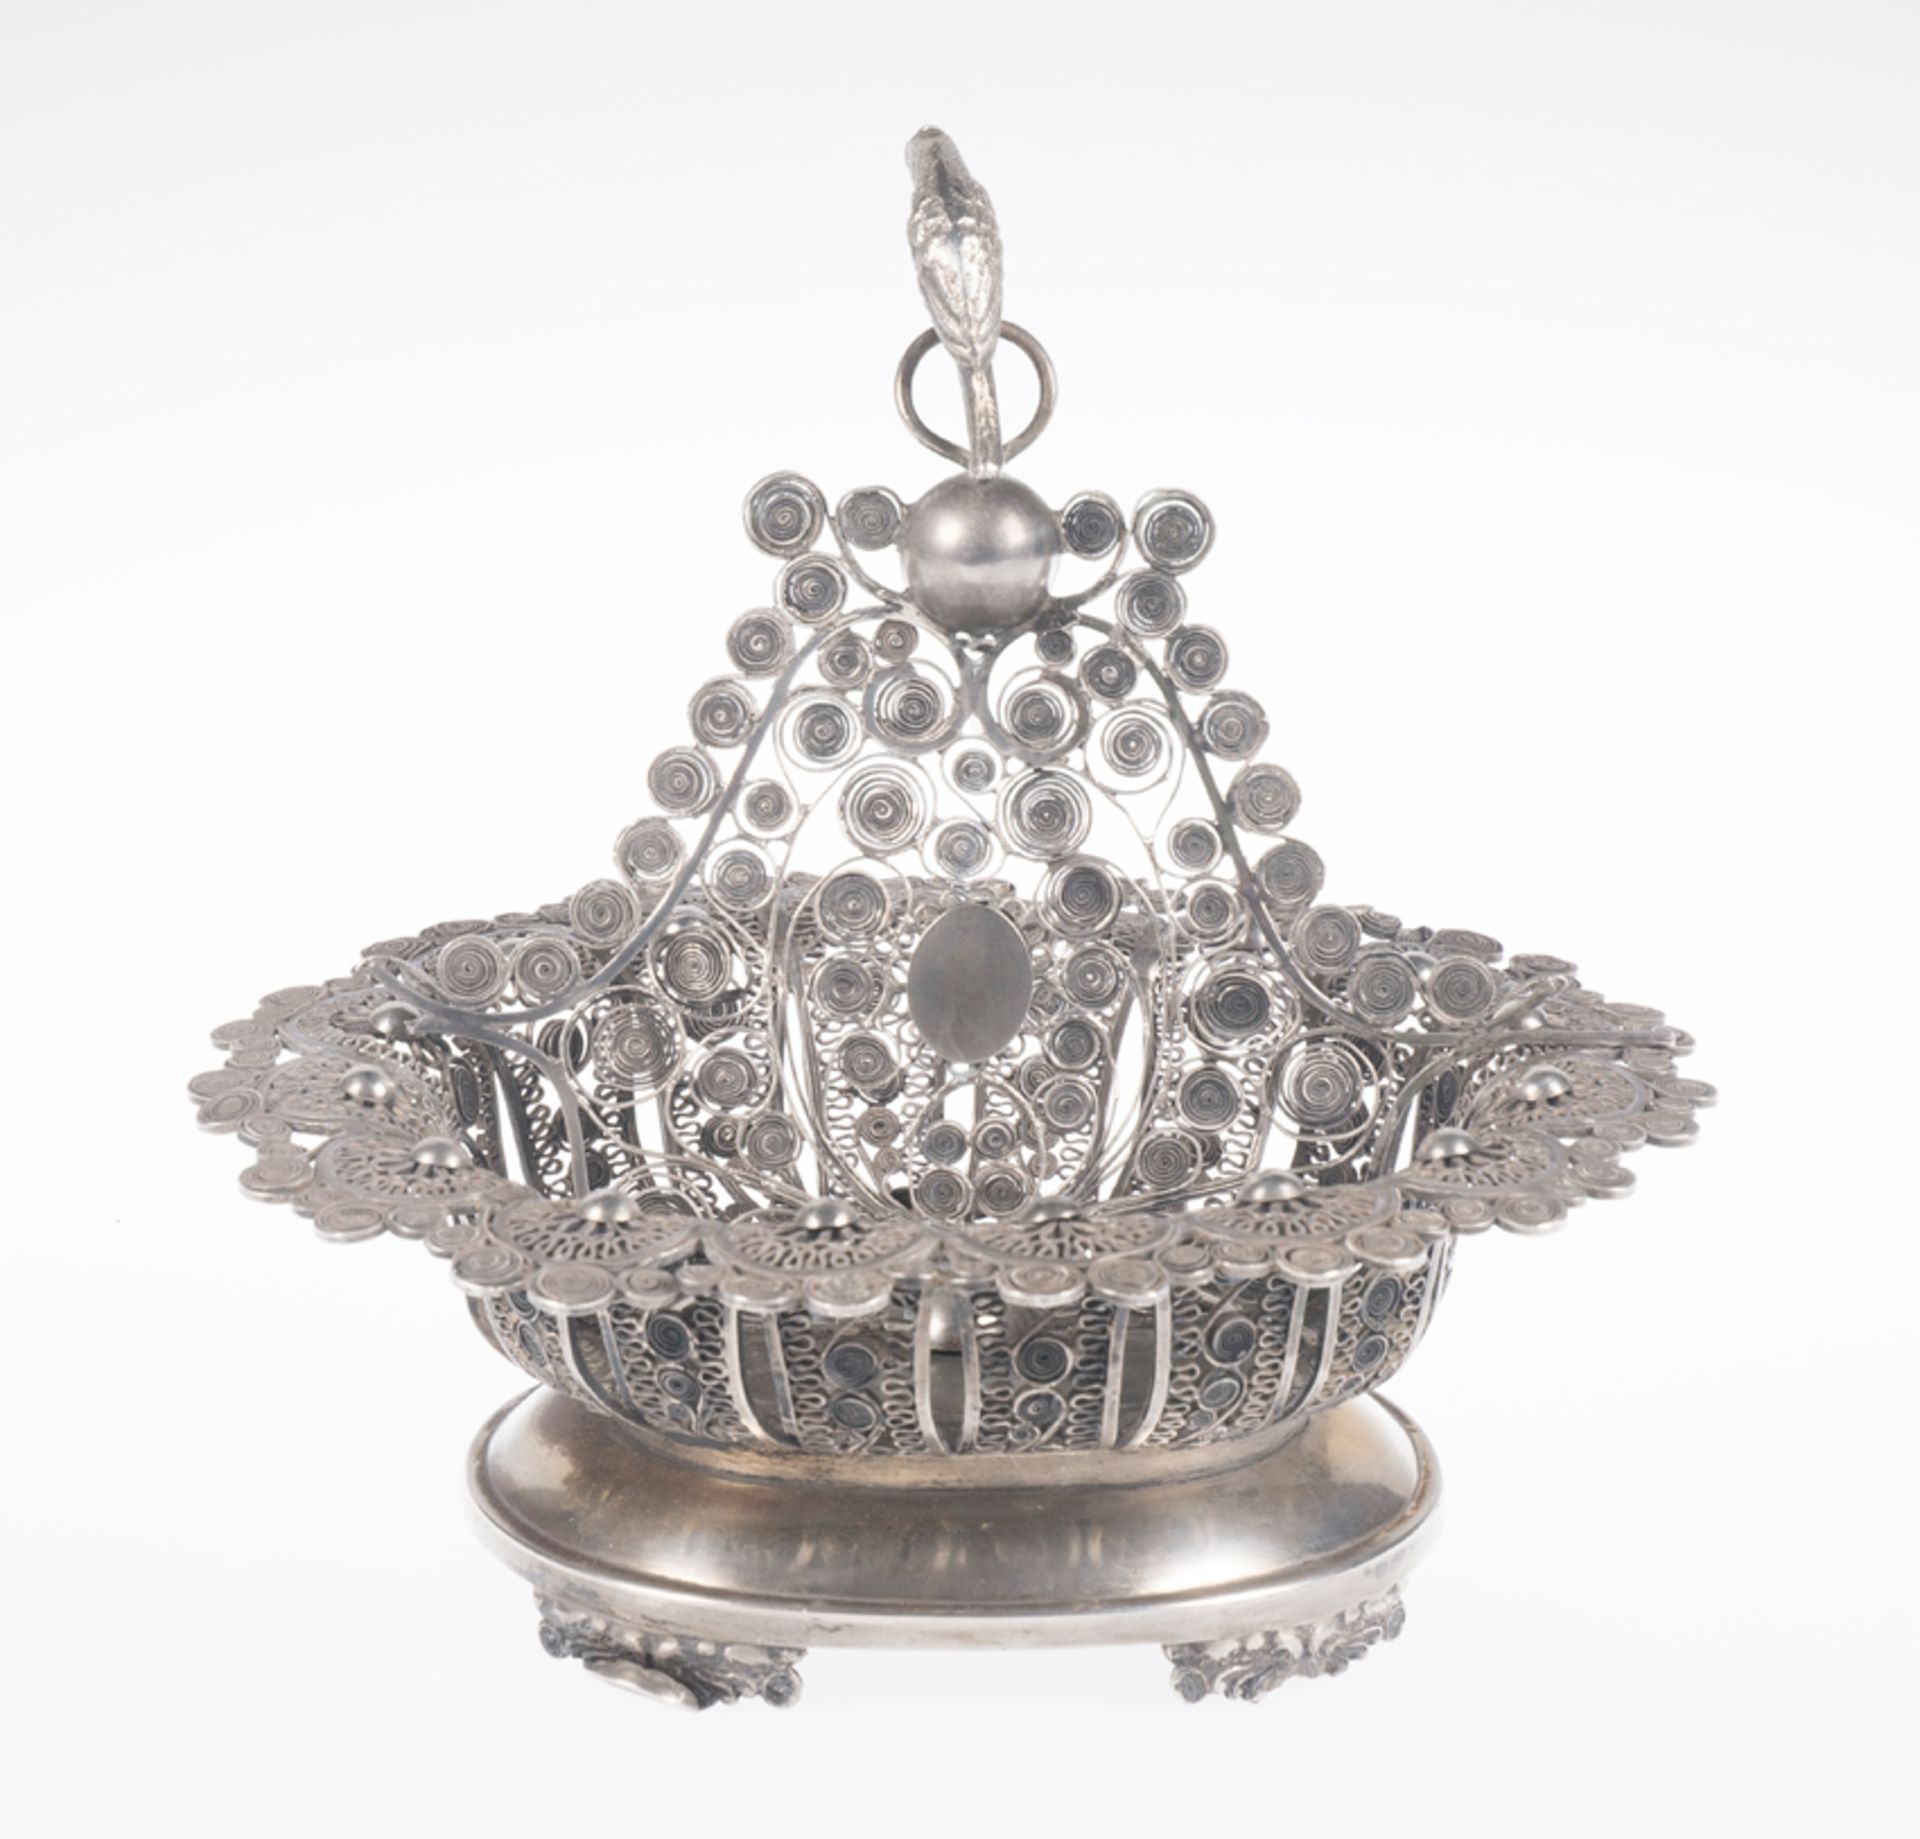 Silver filigree and cast silver centrepiece. Colonial. High Peru 19th century. - Image 4 of 5